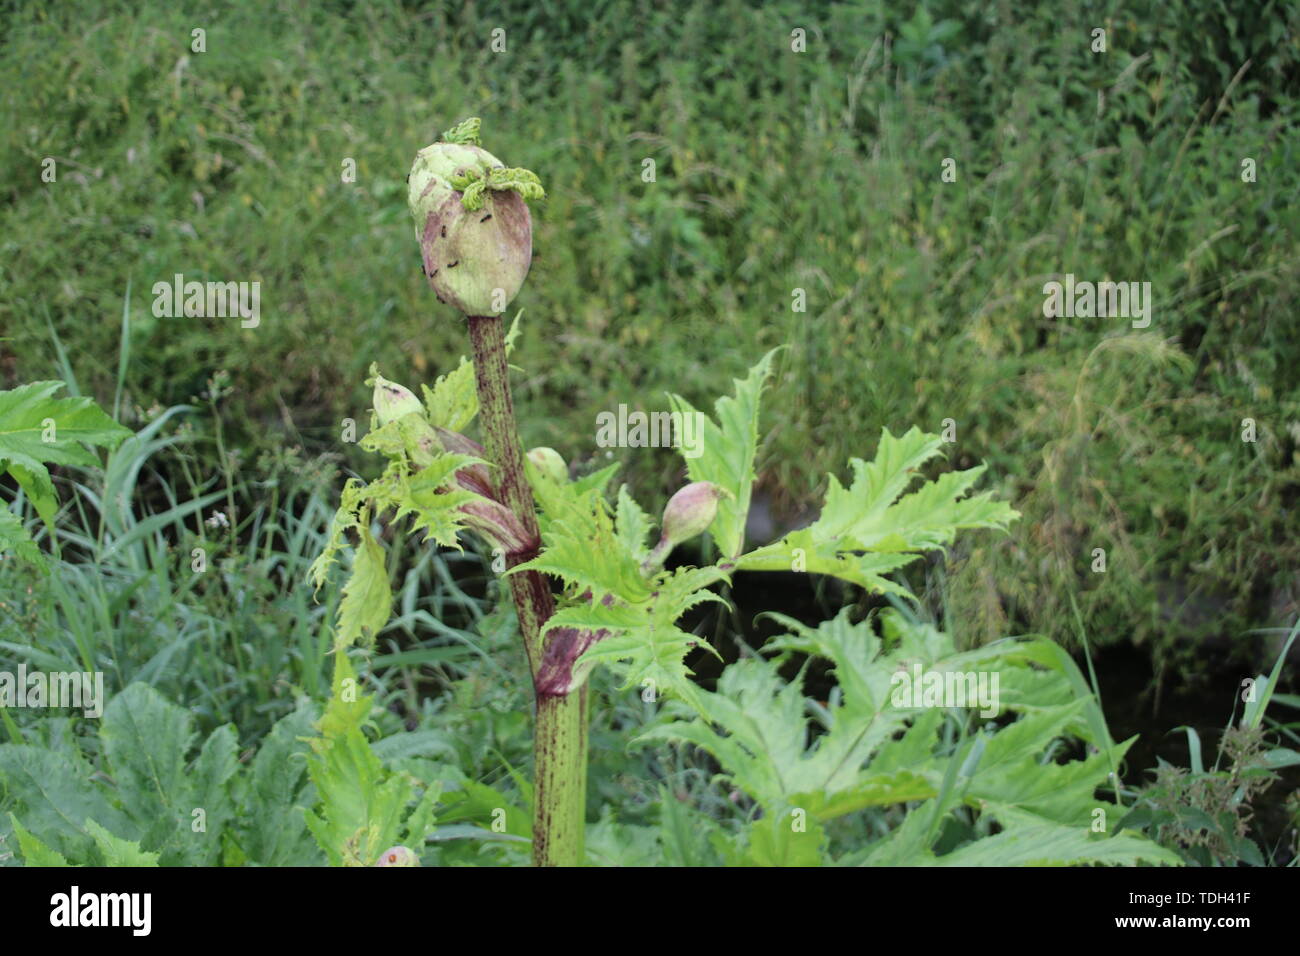 Hogweed plant along the side of the road in Moordrecht, the Netherlands Stock Photo